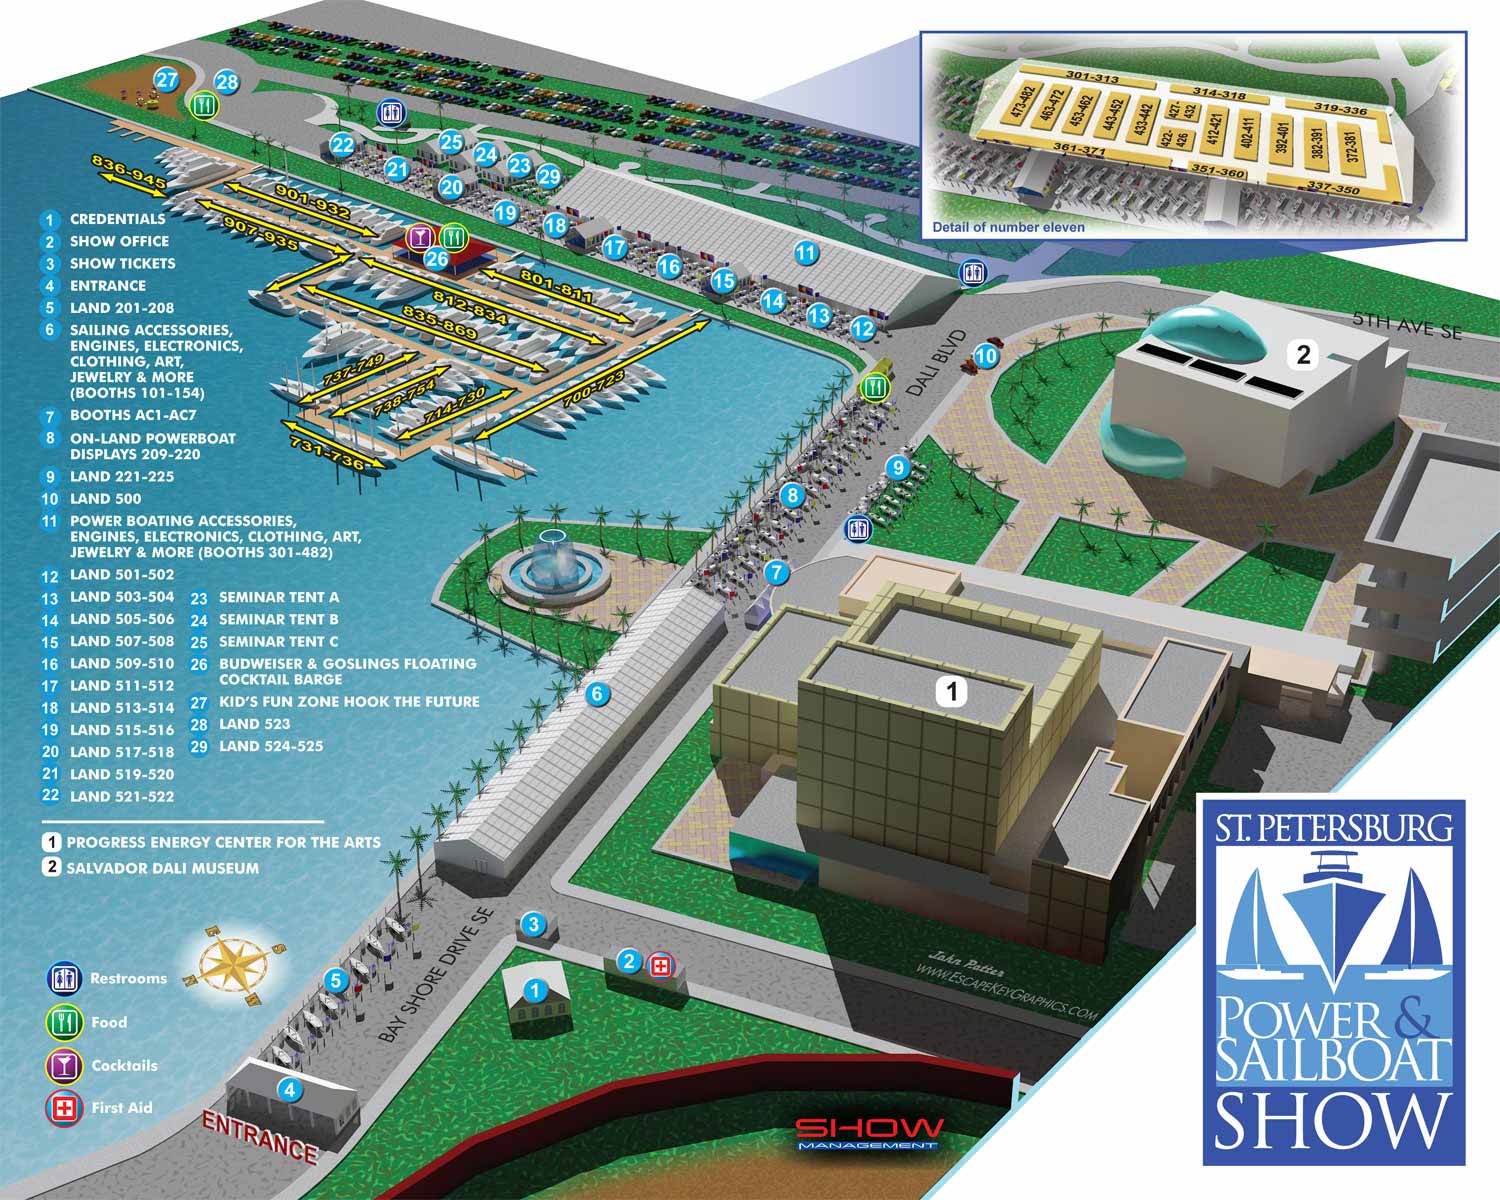 Illustrated Saint Petersburg Power and Sailboat Show Map 2012